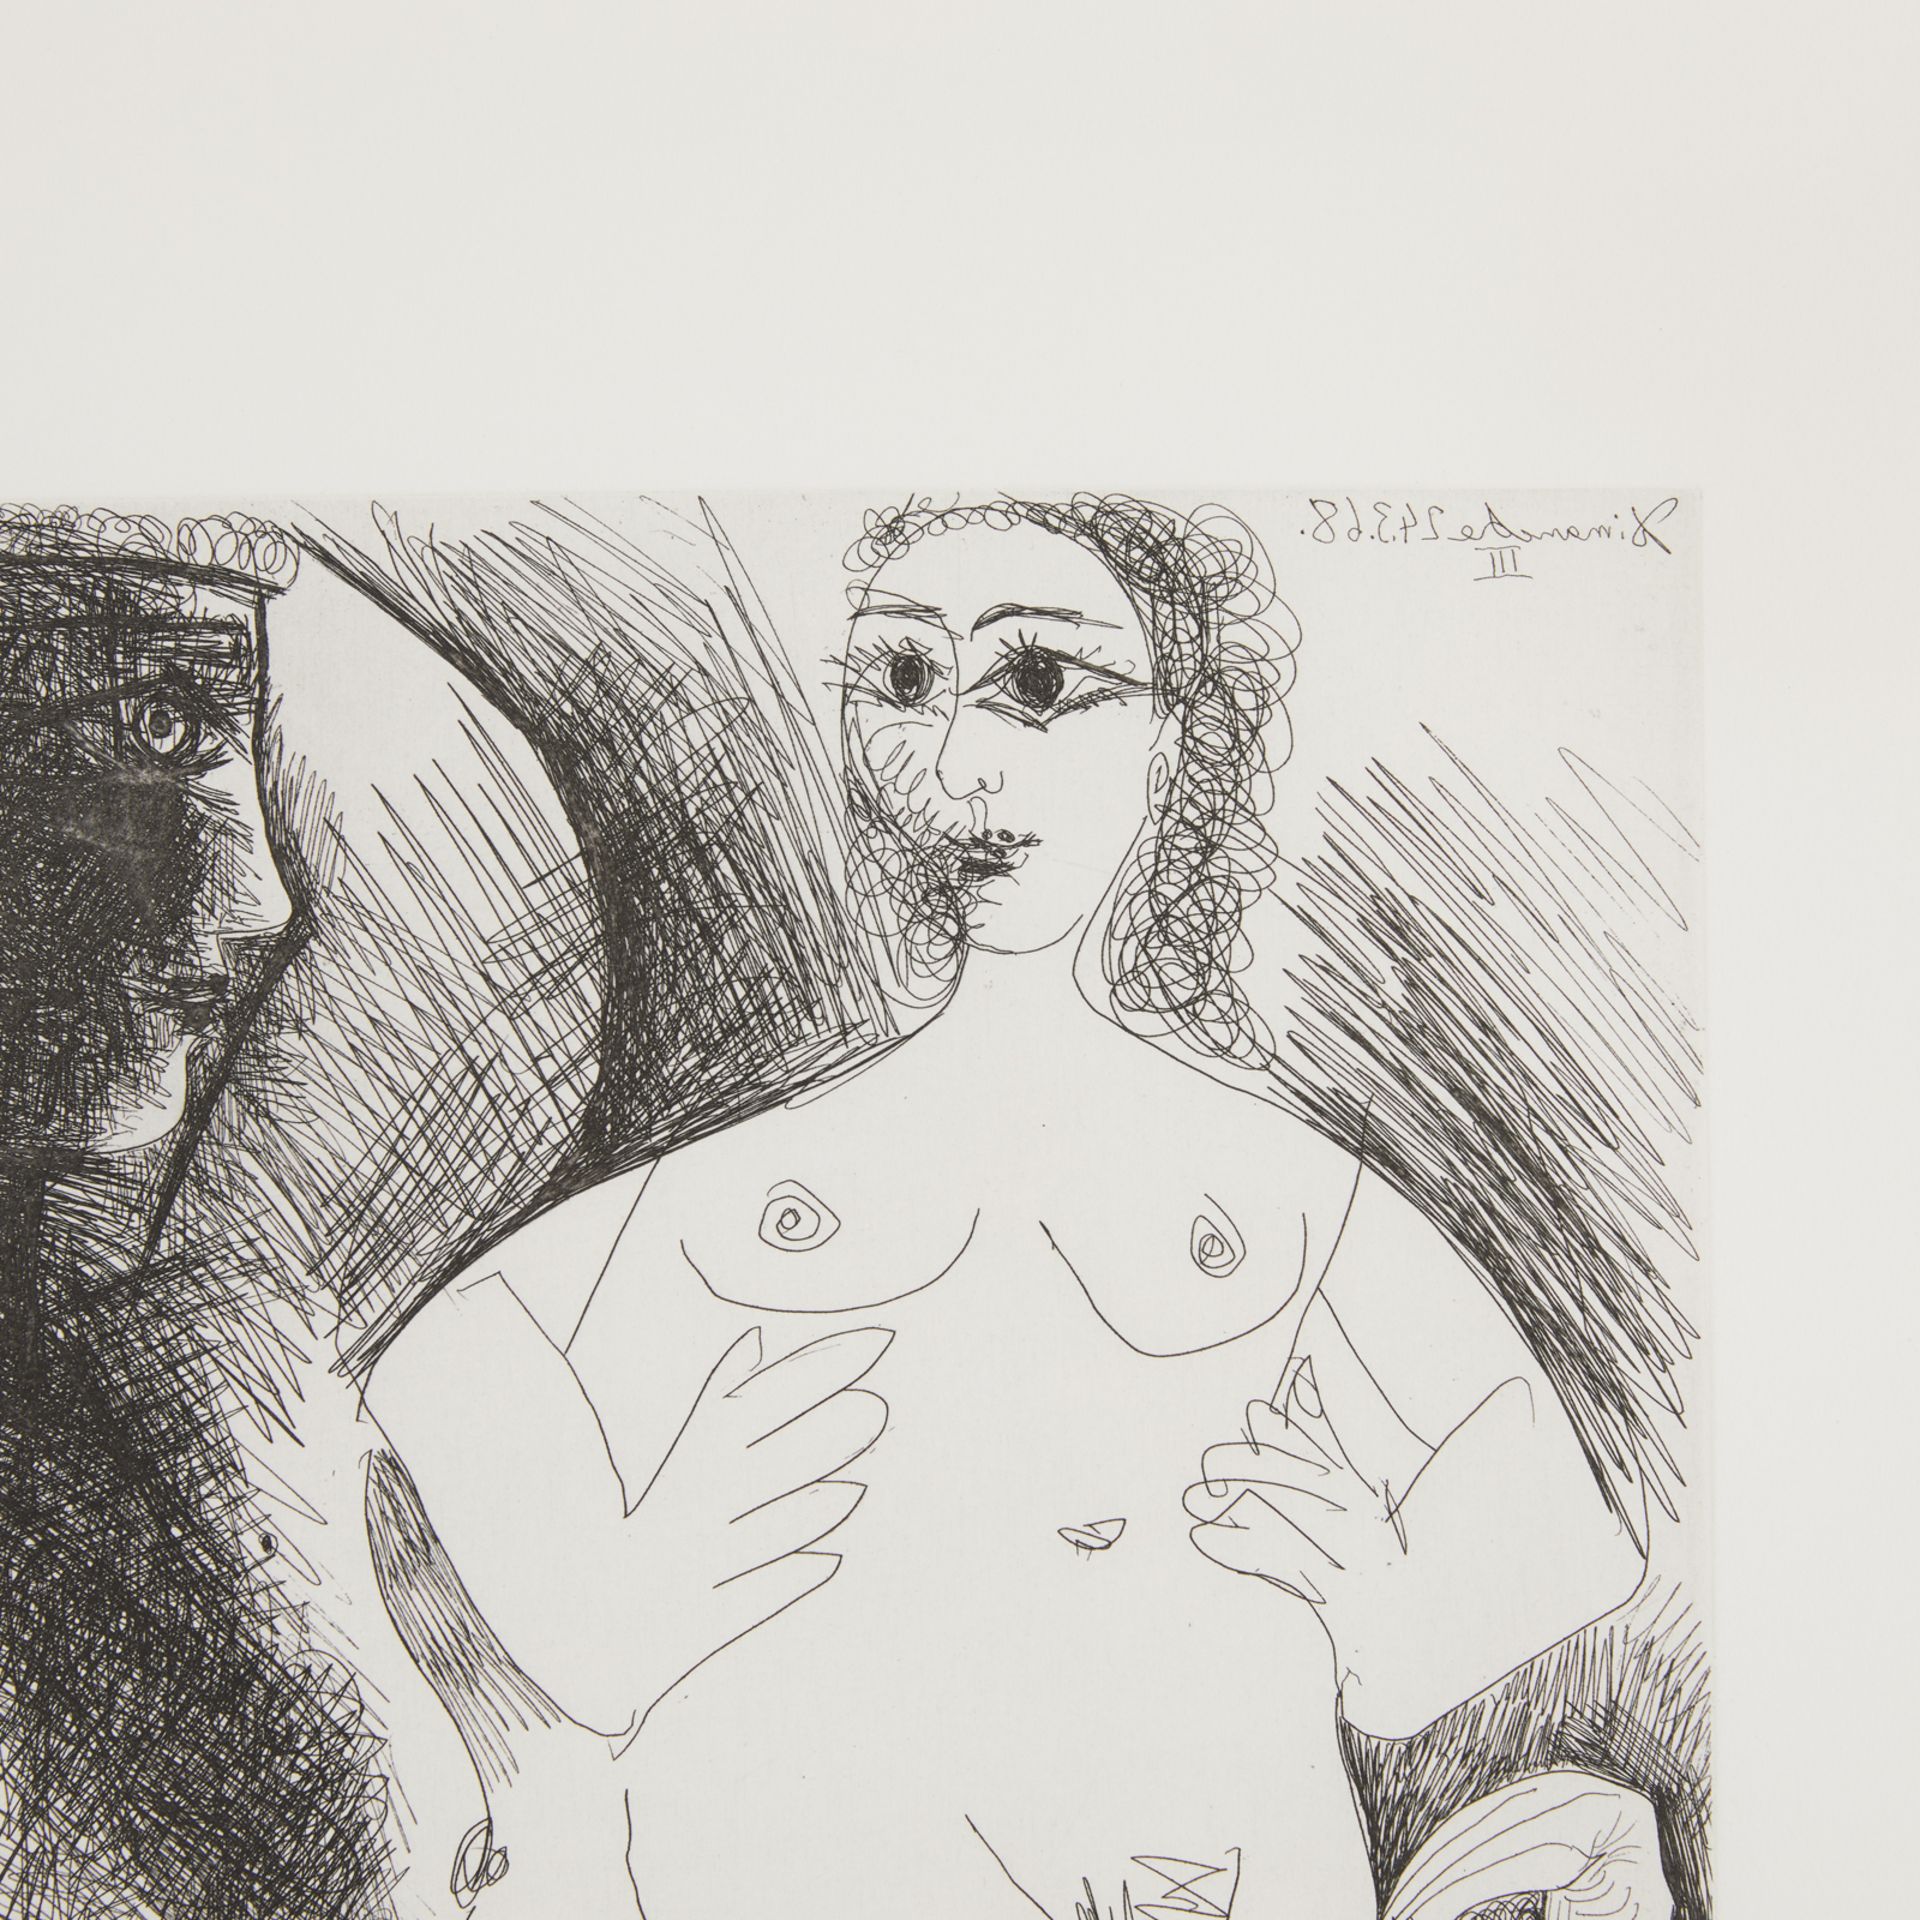 Picasso "Odalisques" Etching 347 Series - Image 4 of 7